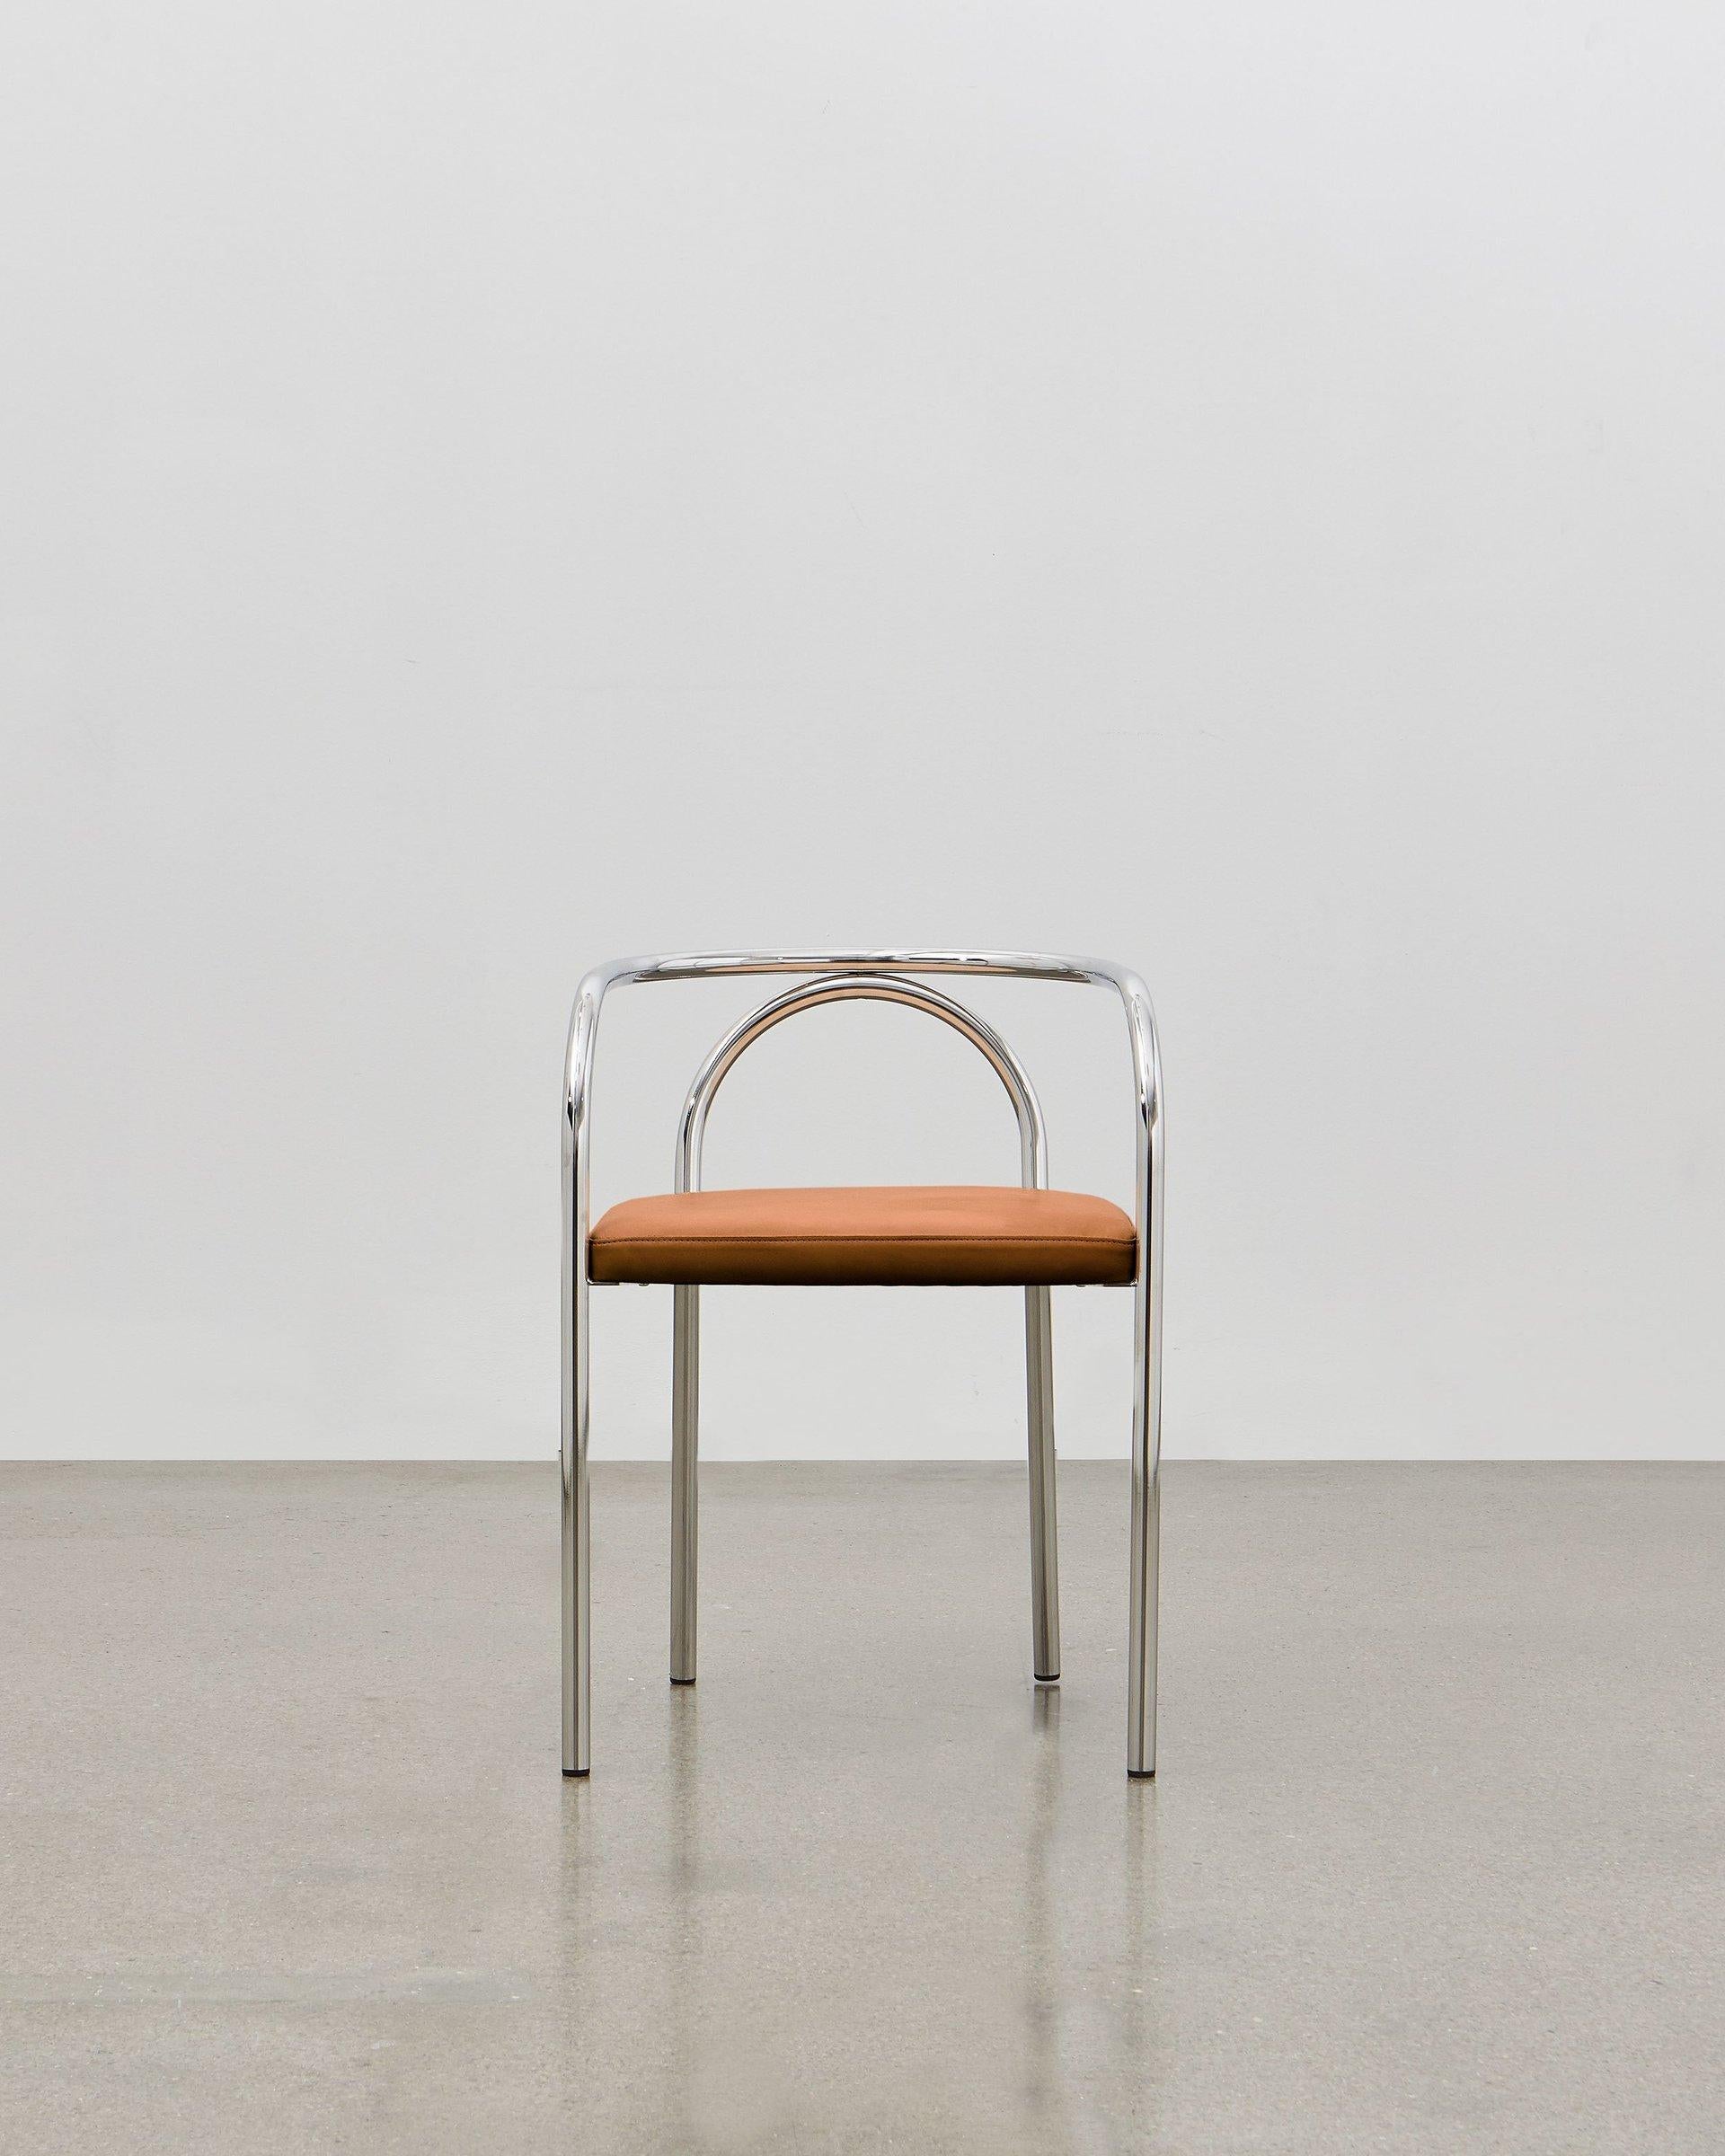 In creating the PH Chair, Poul Henningsen sought to reinvent a number of classic furniture designs that had traditionally been constructed of wood, such as the frequently encountered ‘bistro’ chair. Poul Henningsen saw an opportunity to create a